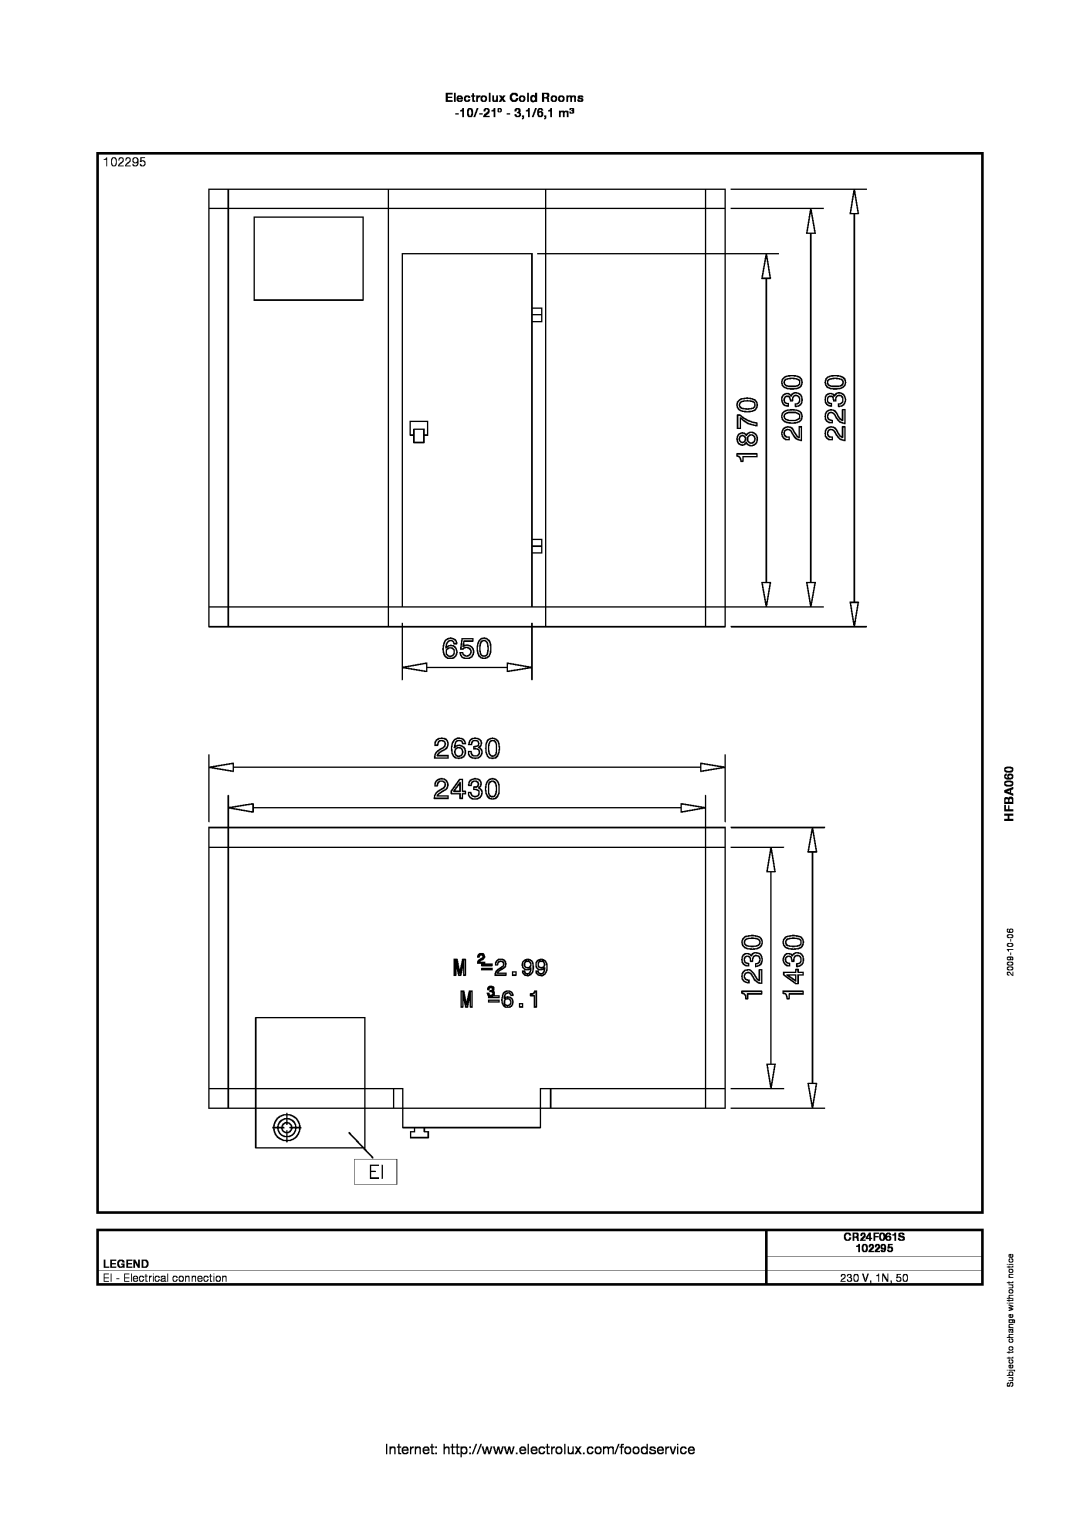 Electrolux 102285 manual 102295, Electrolux Cold Rooms 10/-21º - 3,1/6,1 m³, HFBA060, CR24F061S, EI - Electrical connection 